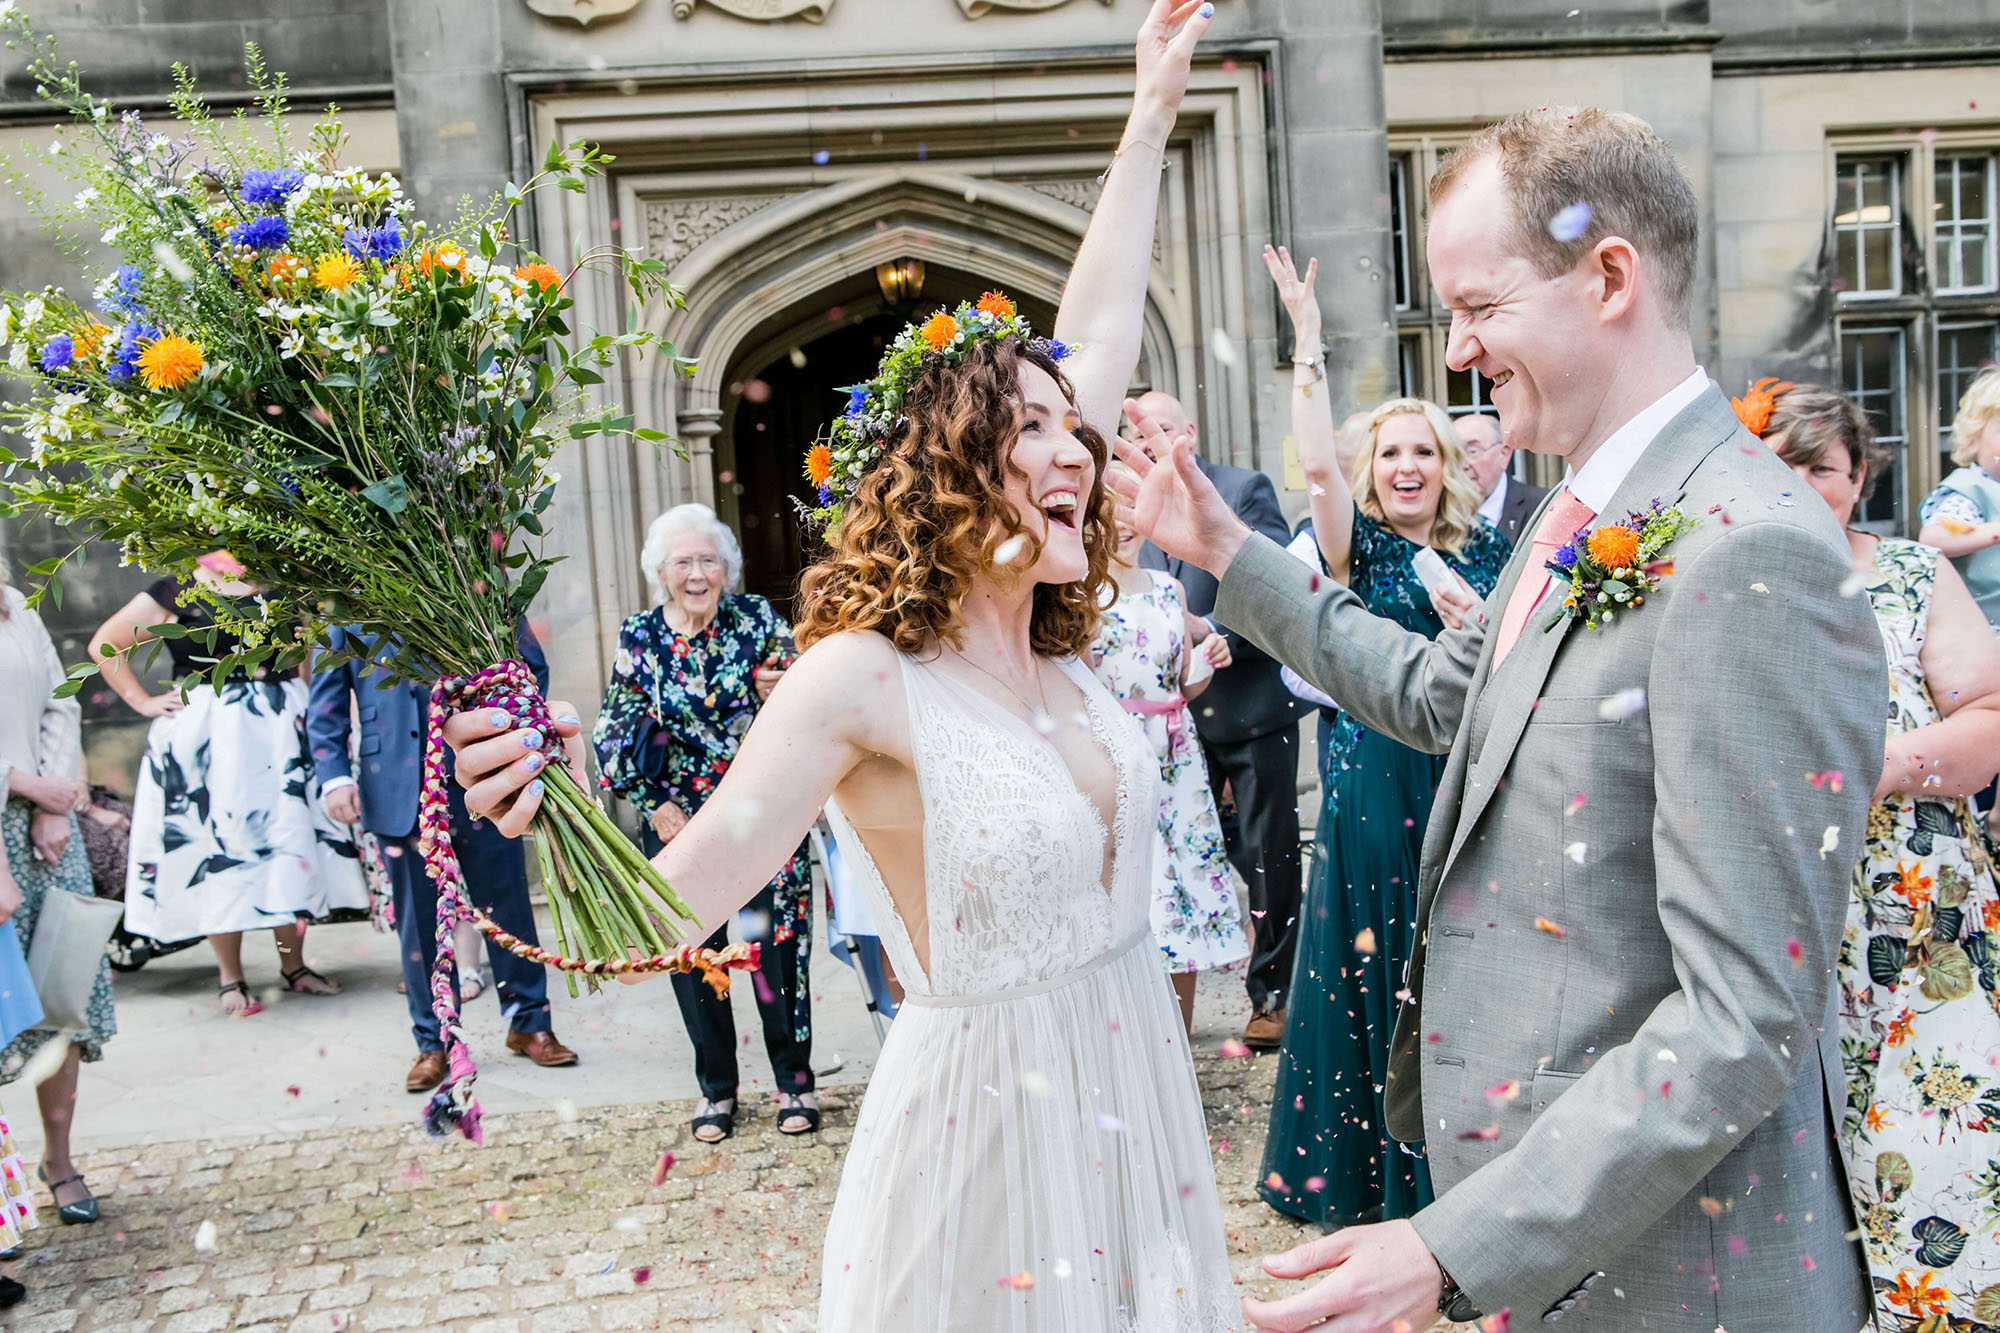 All the just married feels from a happy wedding photo outside the ceremony venue with Erika Tanith Photography Northumberland